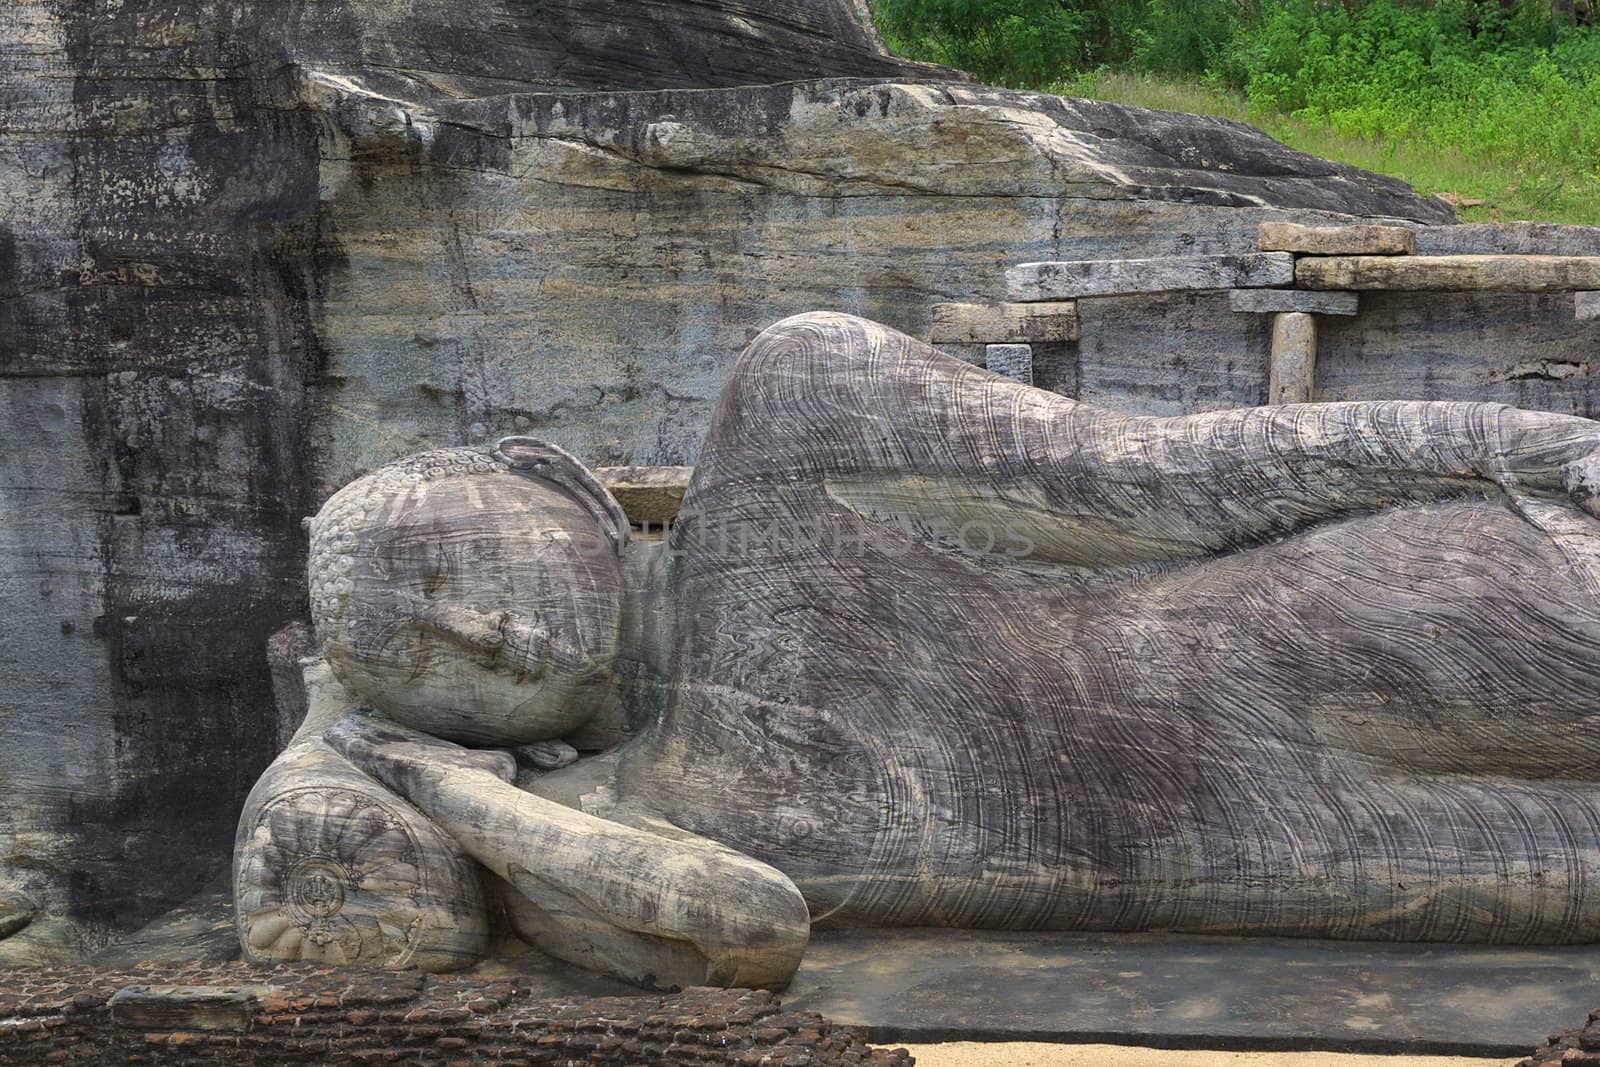 The collosal (14-metre long) Reclining Buddha was carved out of a granite cliff at Gal Vihariya in Pollanaruwa in Sri Lanka. It is part of one of the most important Buddhist shrines in the world and part of a UNESCO World Heritage Site.